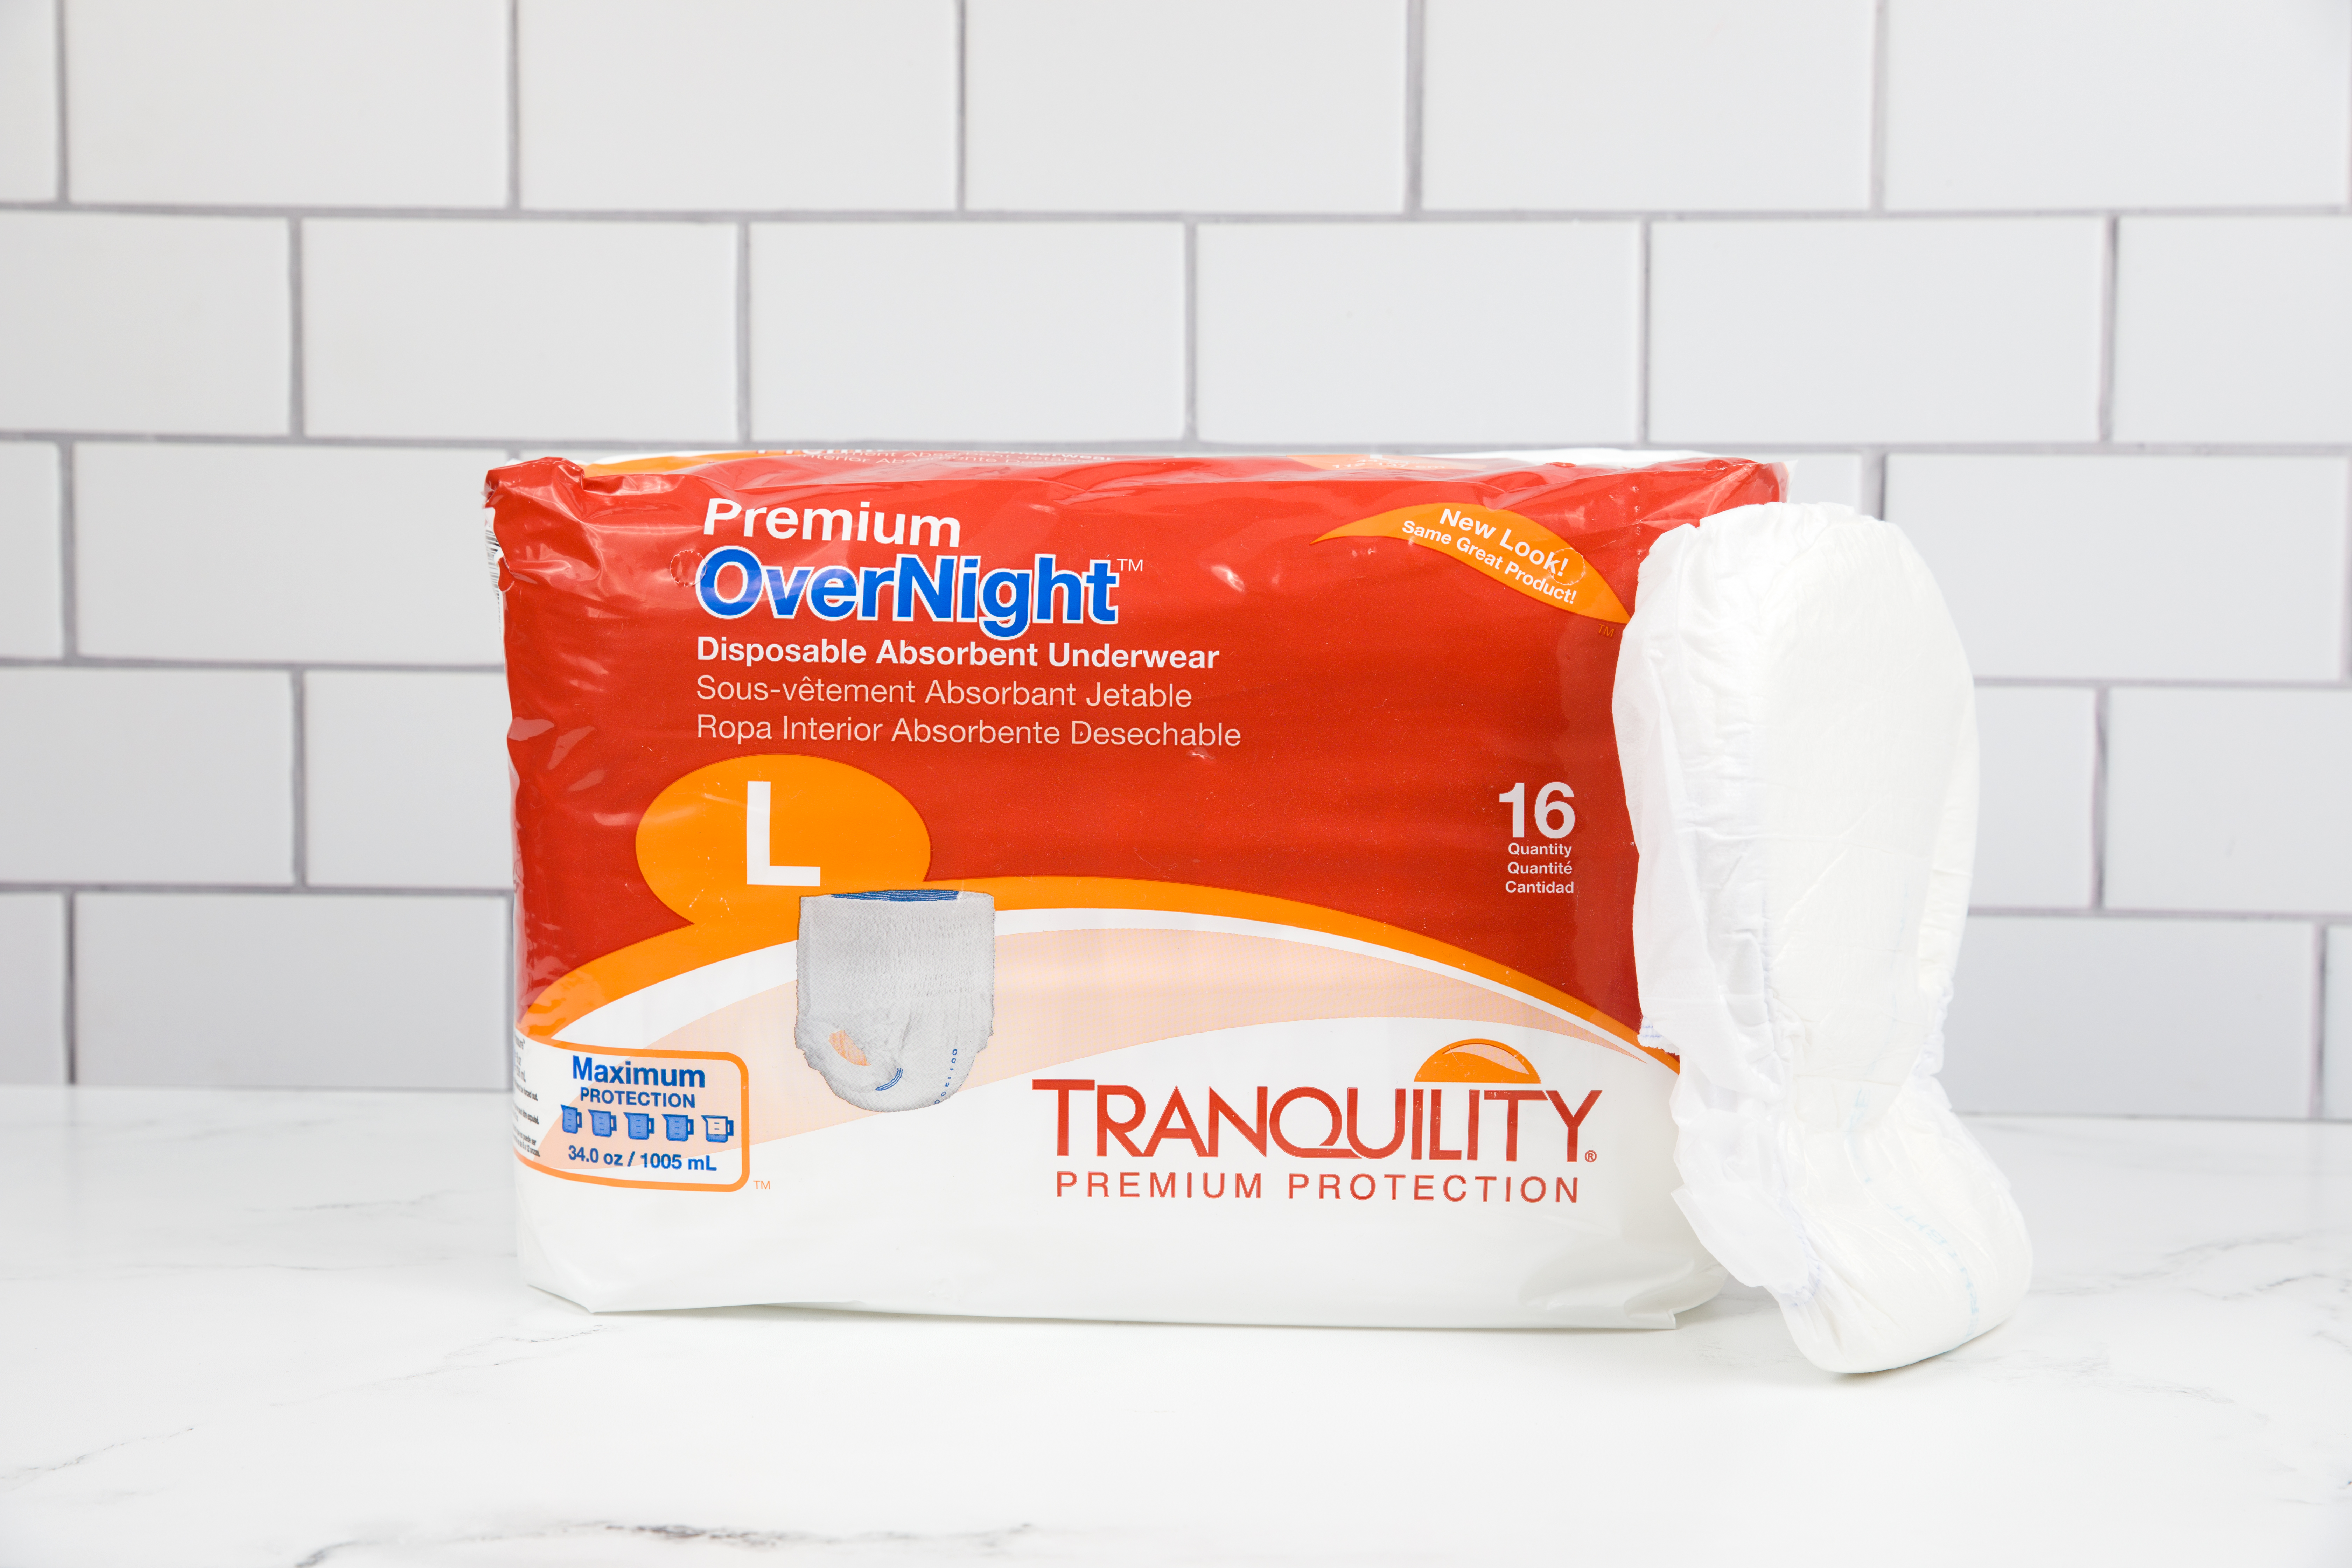 Tranquility Premium OverNight Product Review: Why Customers Love Them